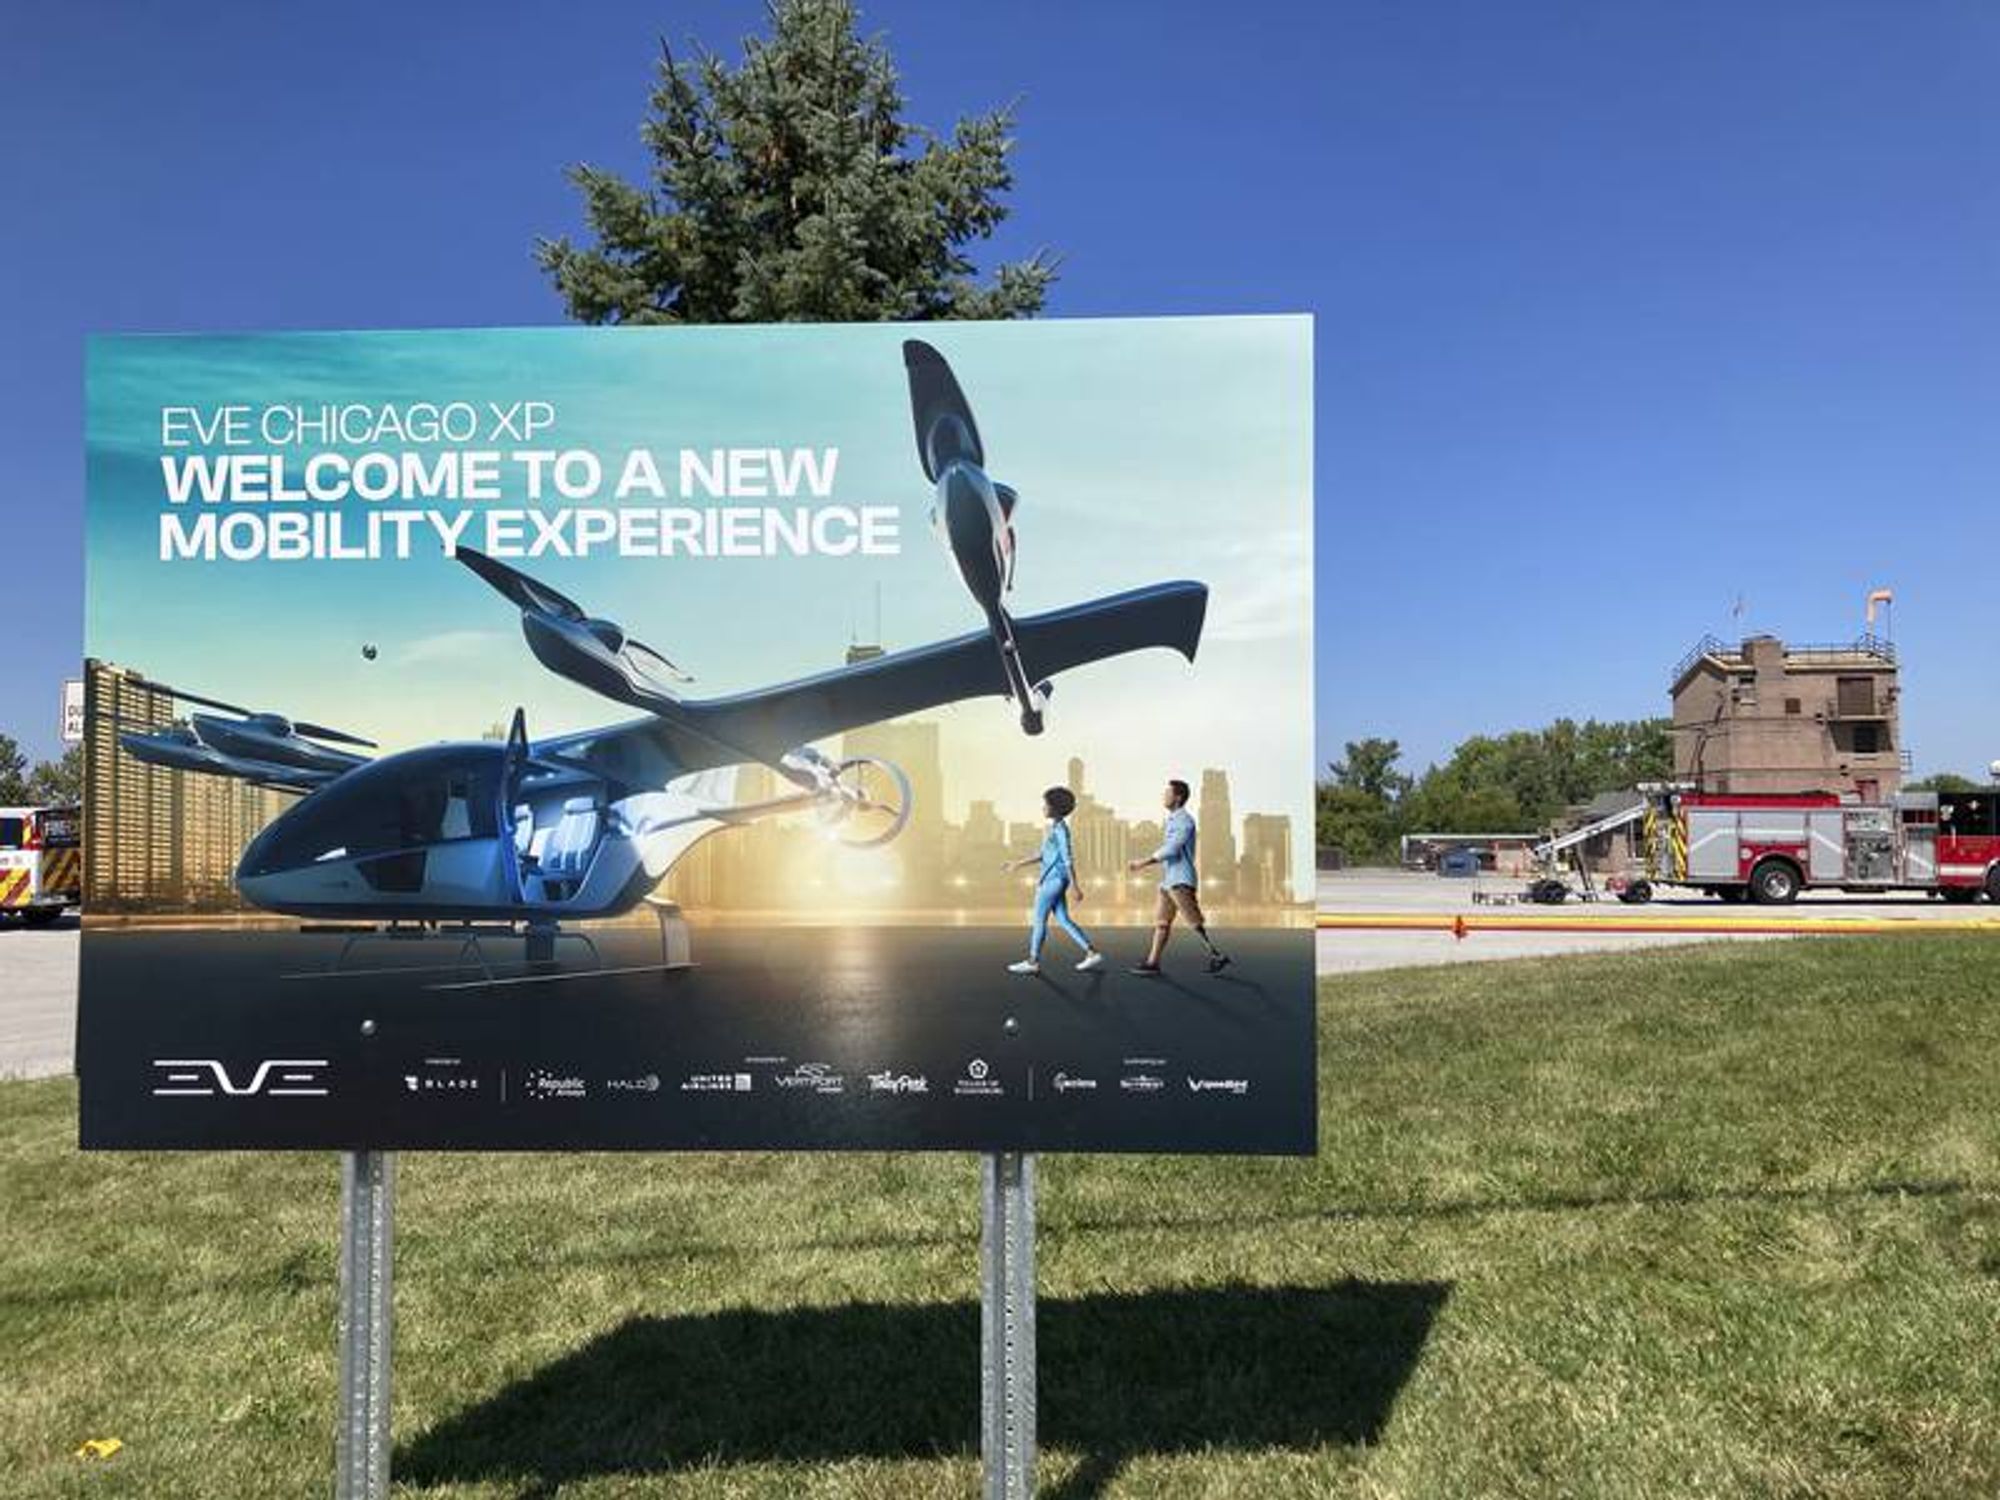 Helicopter ‘simulations’ in Tinley Park could pave way for electric flying vehicles, 15-minute air commute – Chicago Tribune